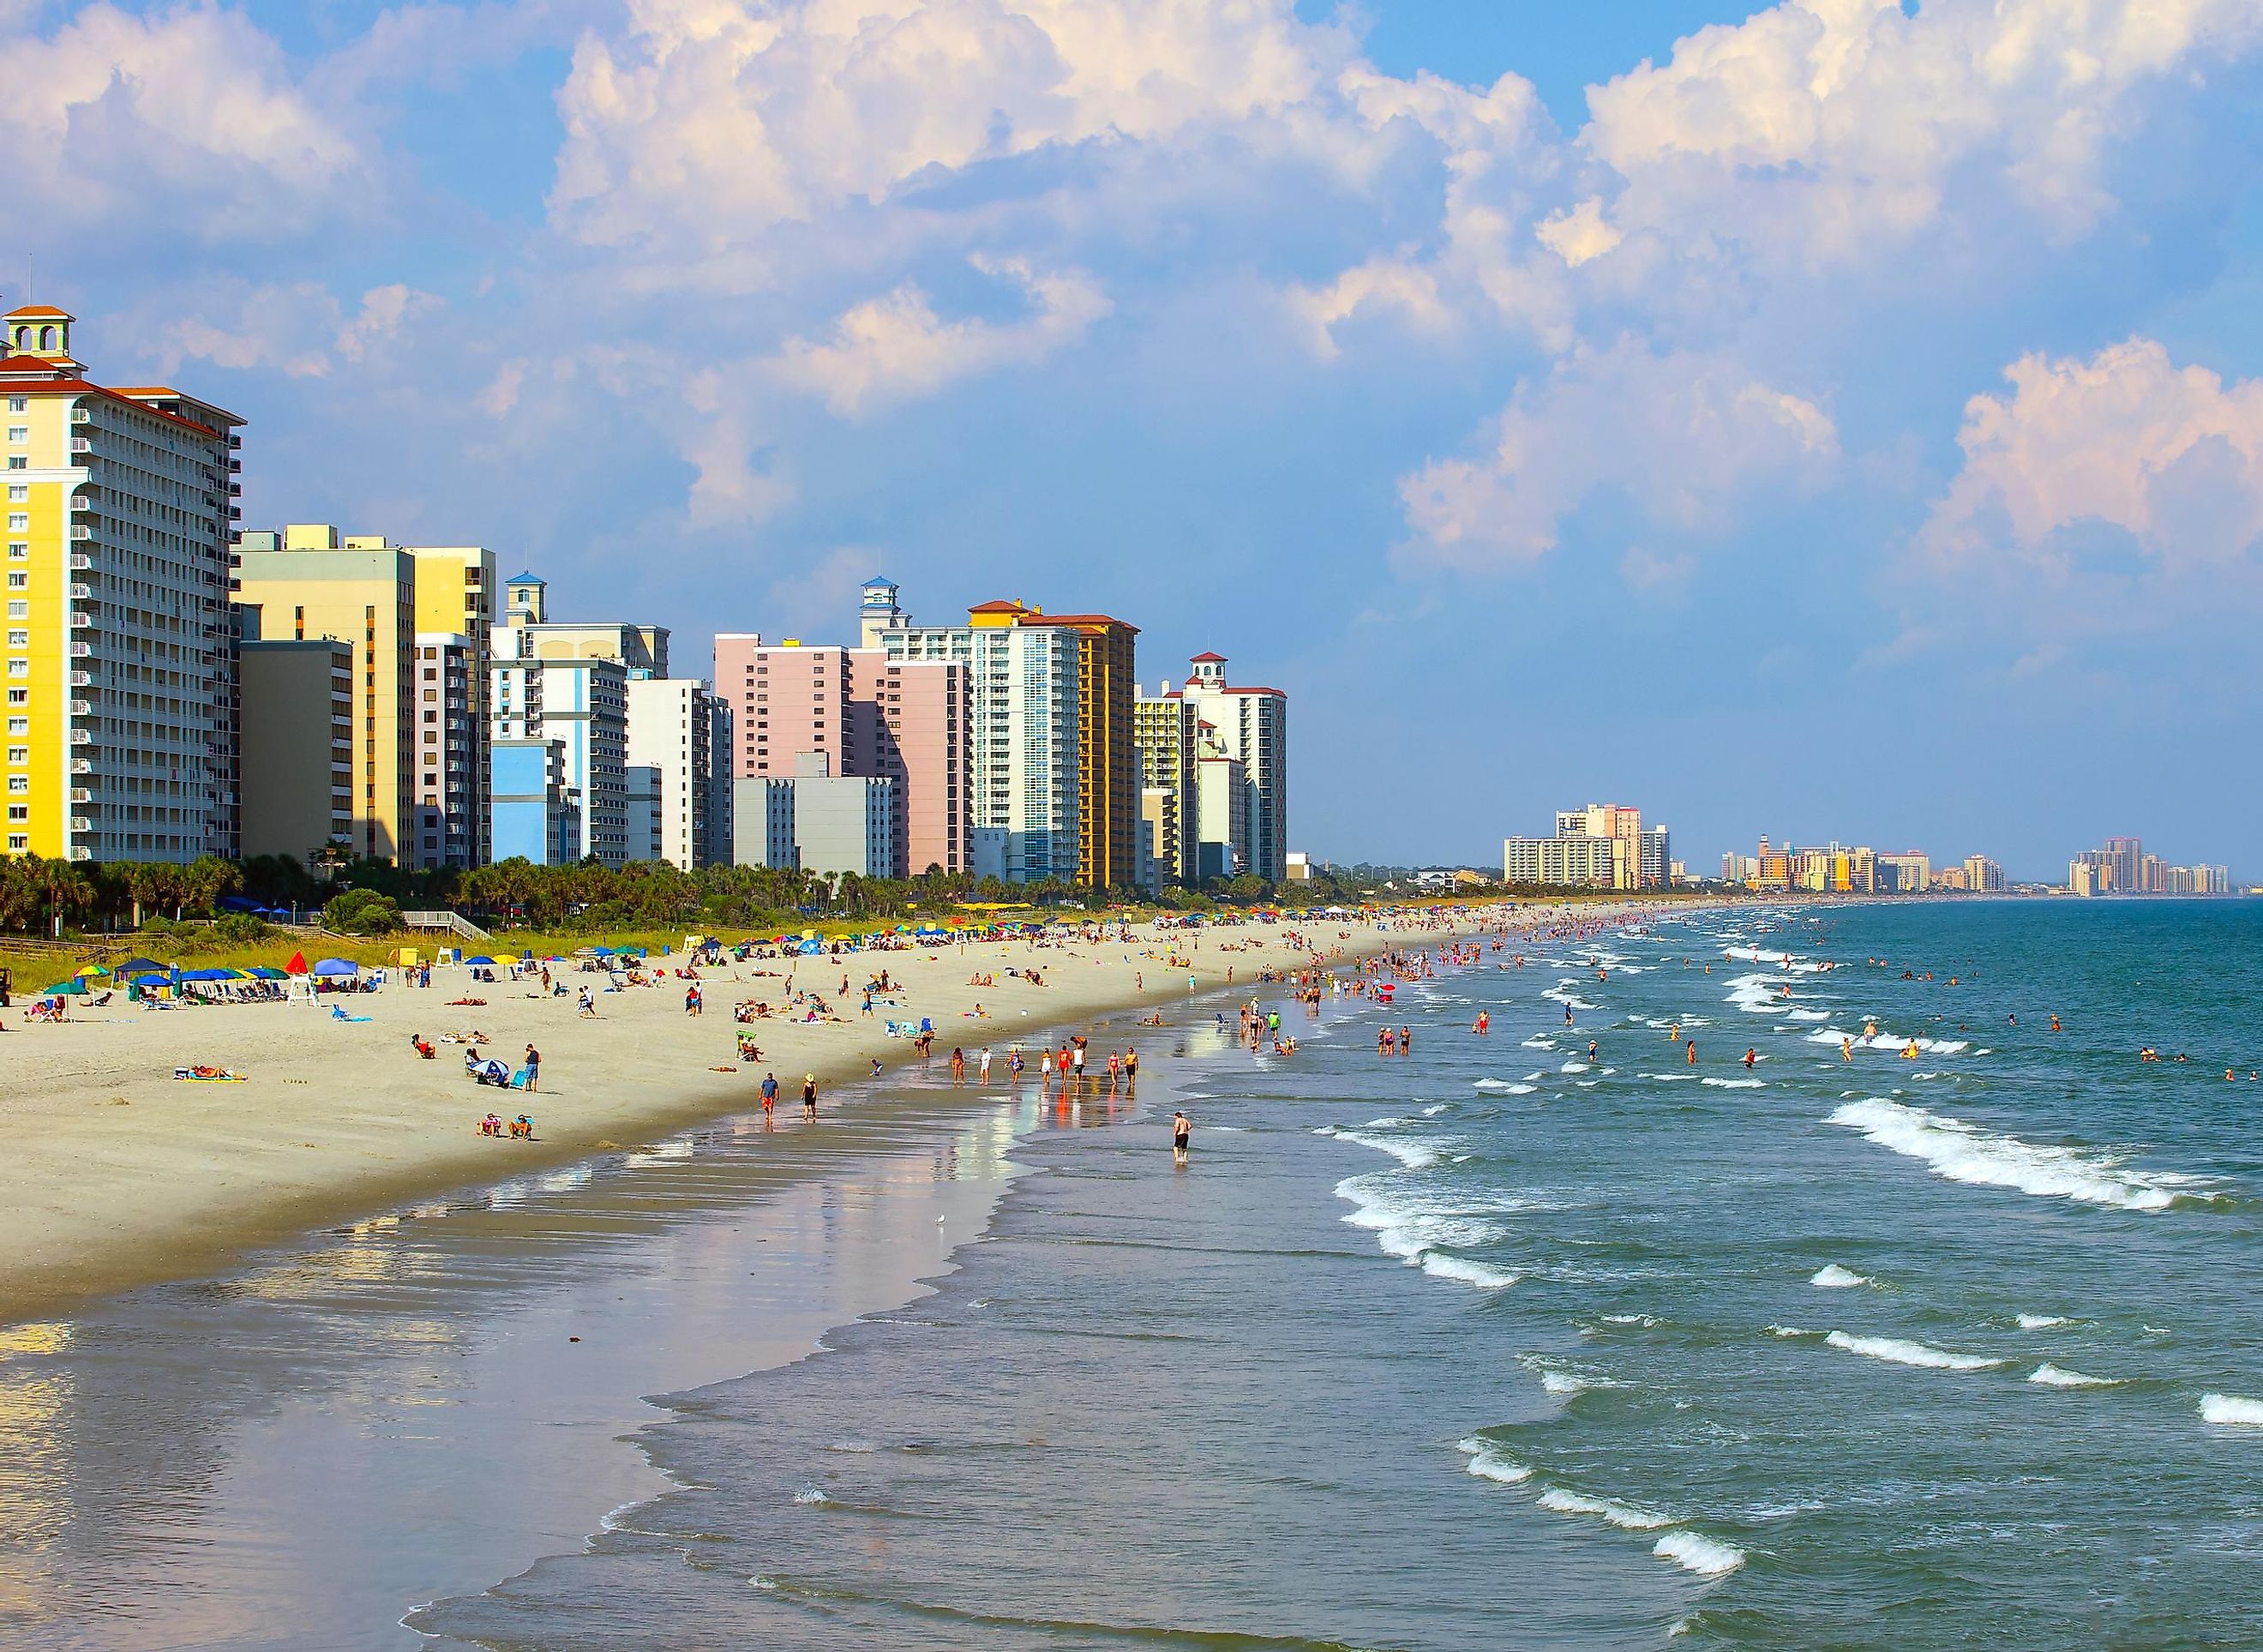 A view of the shoreline from Myrtle Beach, South Carolina.